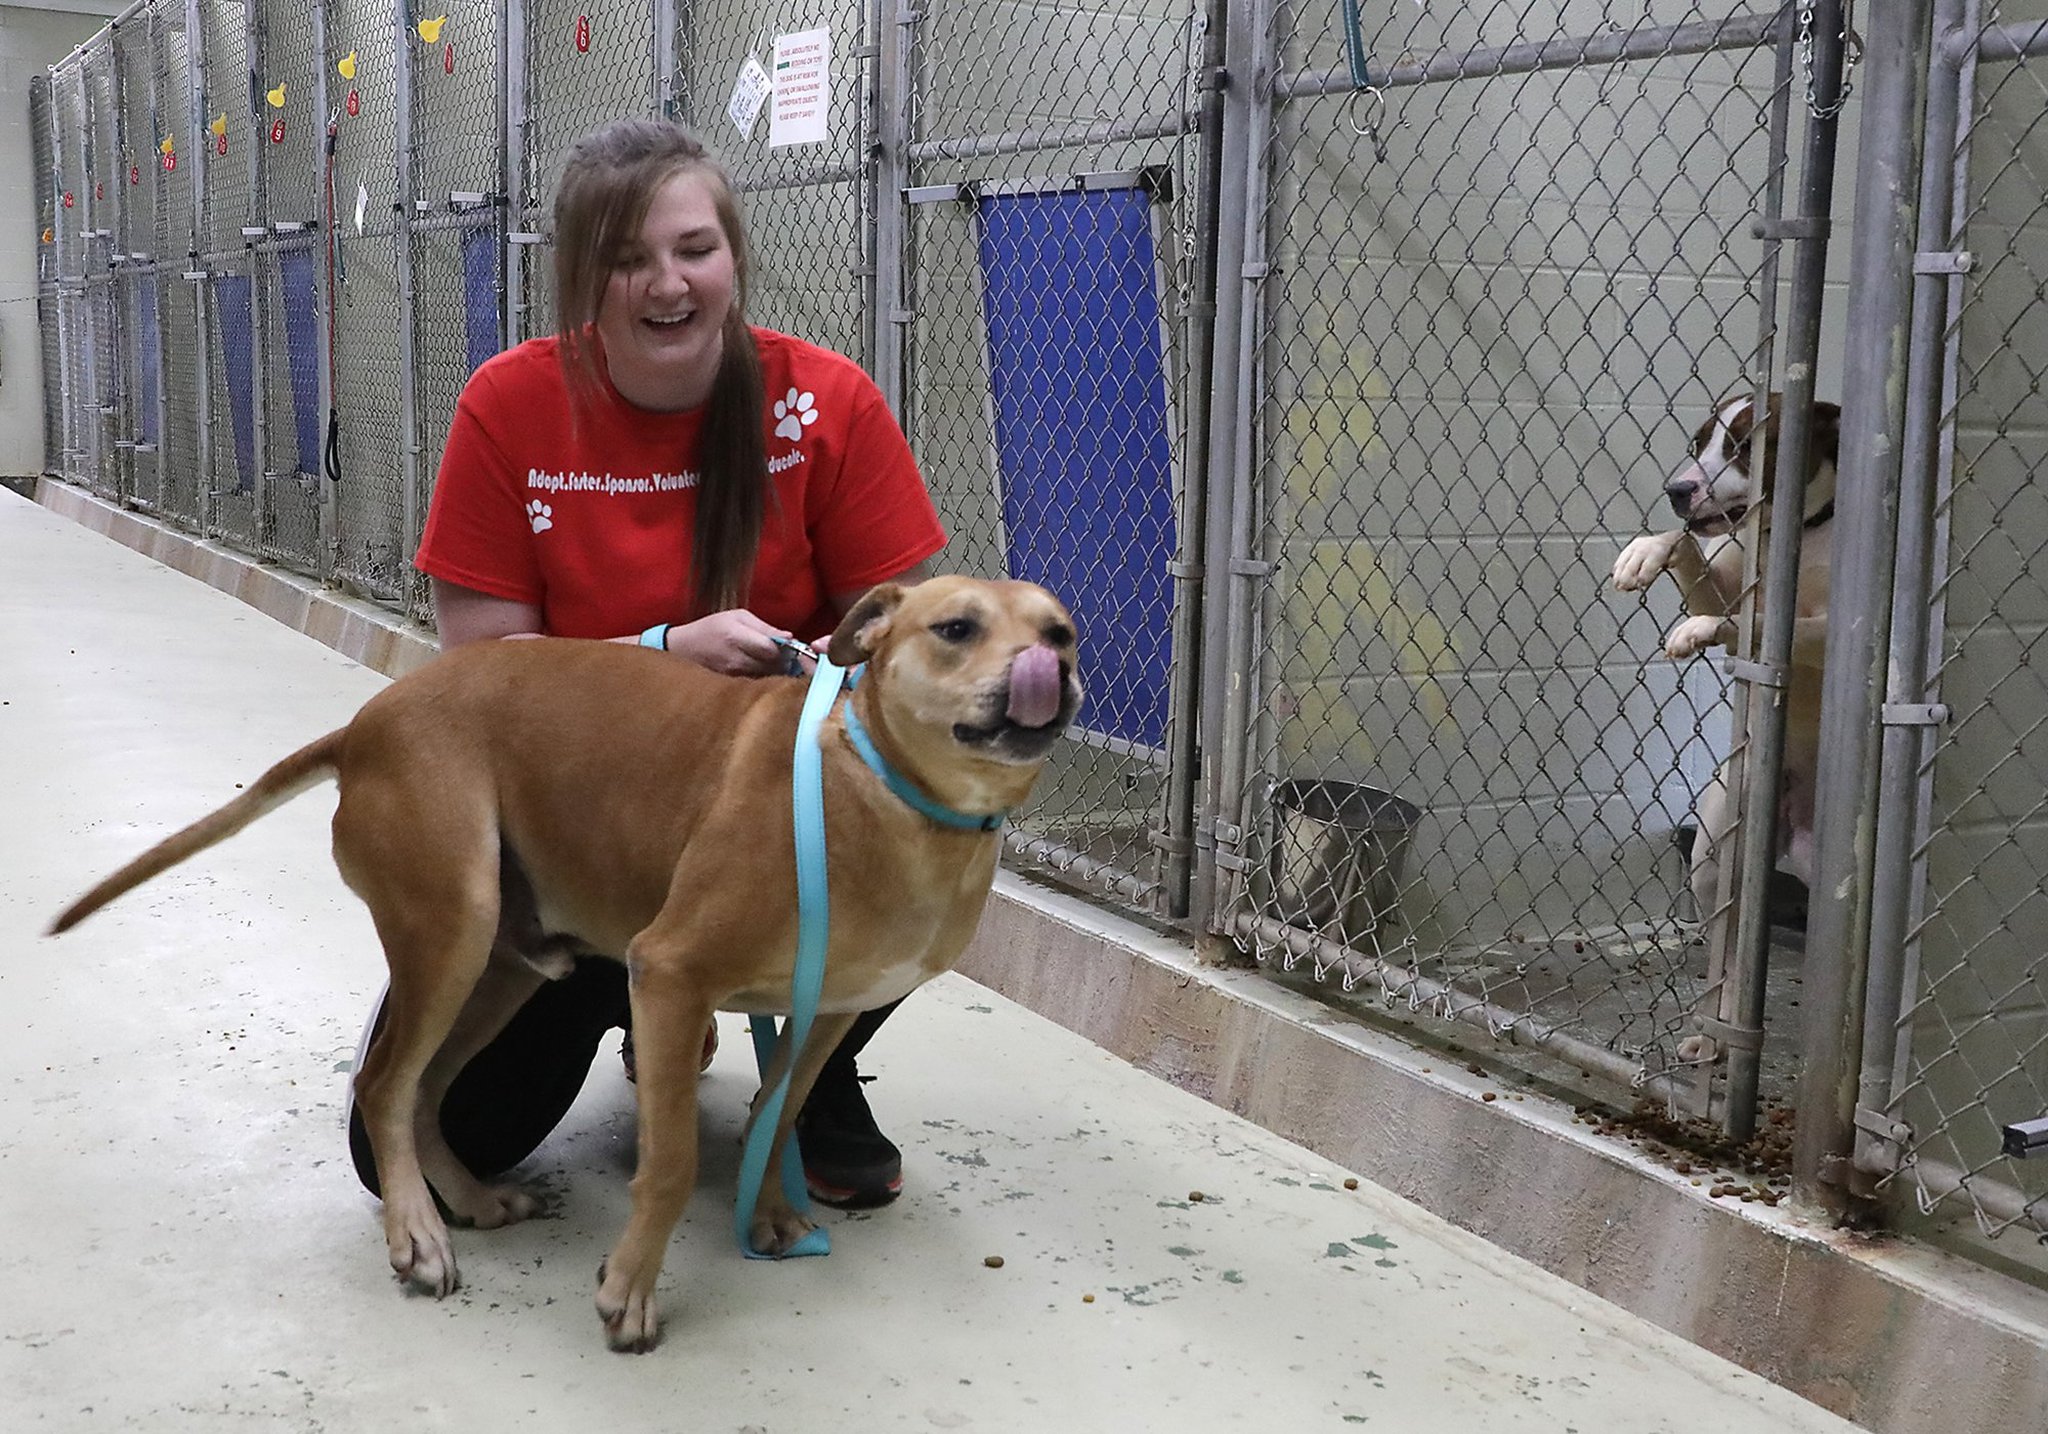 Some Clark, Champaign animal shelters open, others remain closed